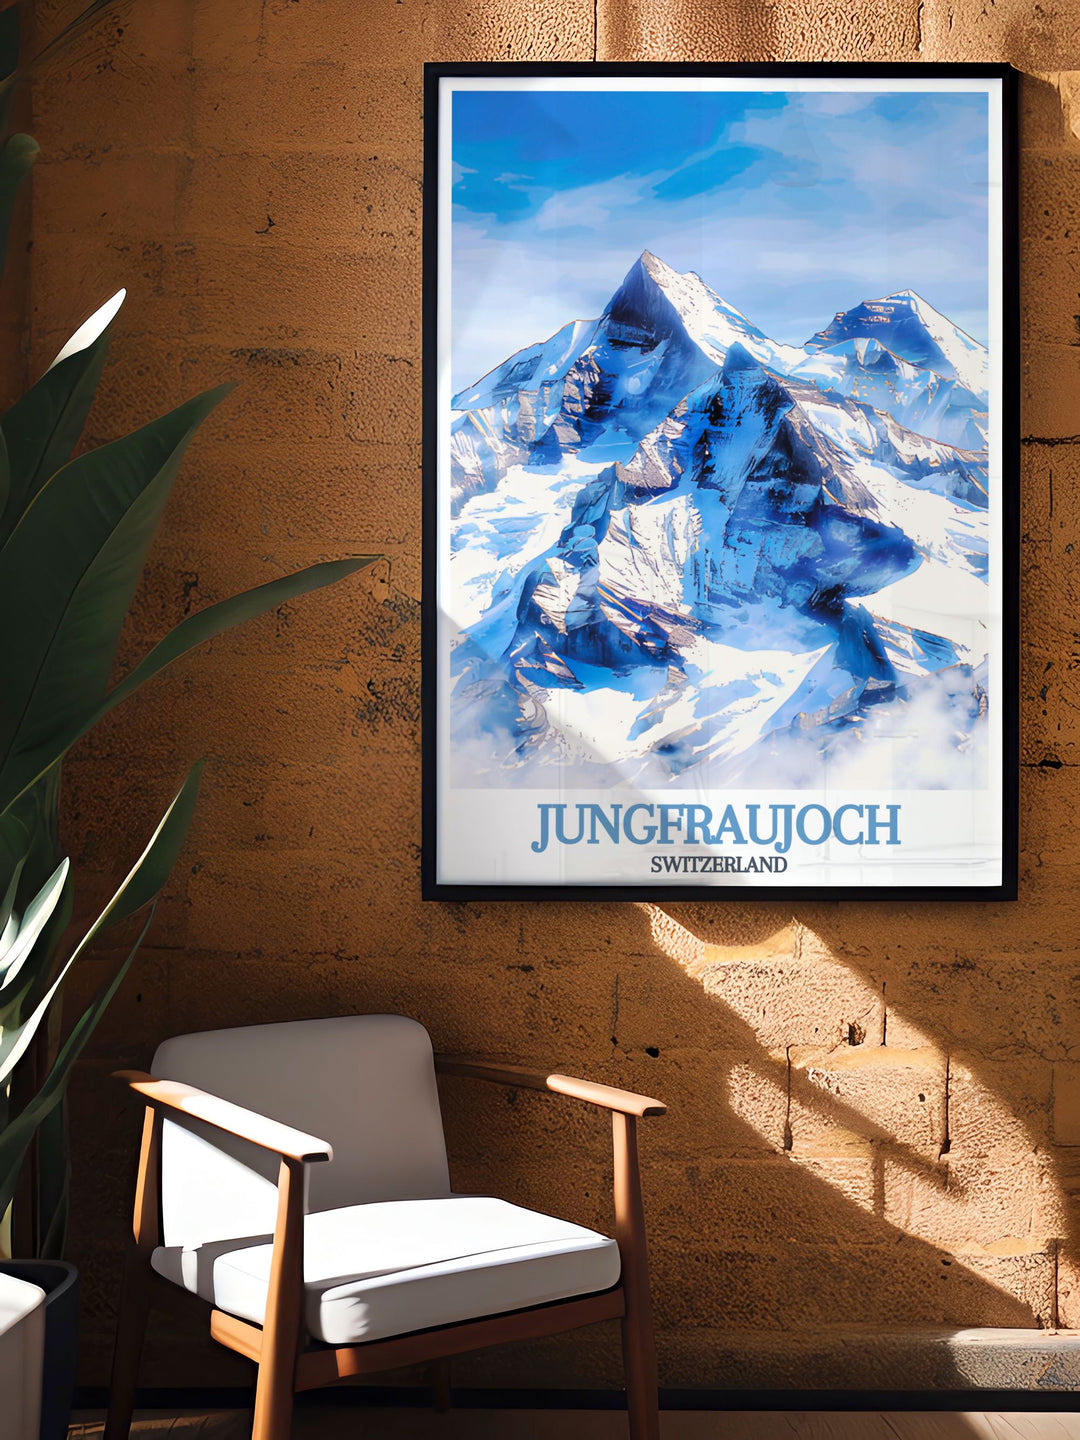 Highlighting the trio of Eiger, Mönch, and Jungfrau, this travel poster brings the stunning alpine scenery of Switzerland into your home. The detailed illustration captures the unique allure of each peak, making it perfect for those who love mountain adventures and natural beauty.